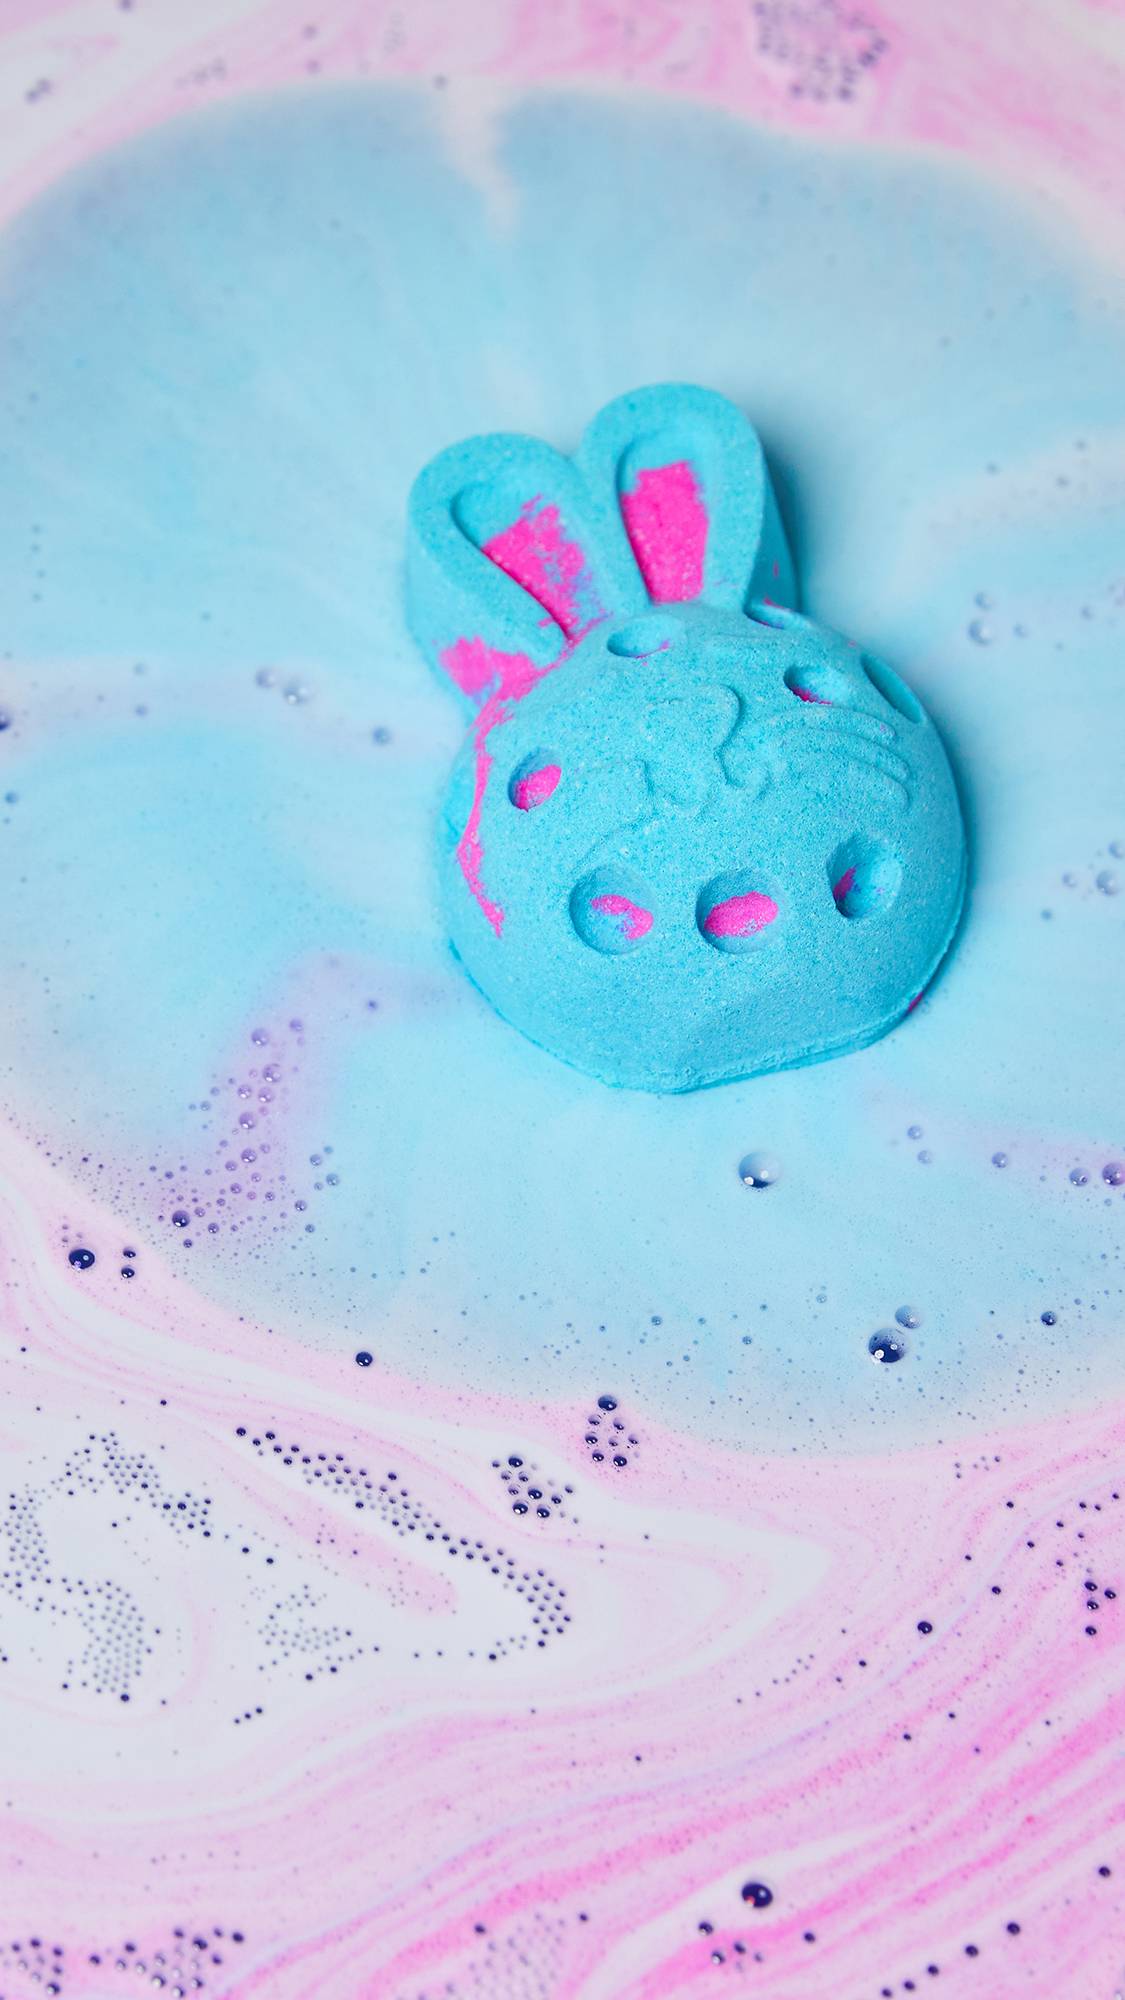 The Bunny Moon bath bomb dissolved in the water giving off thick bubbly swirls of velvety pink and blue foam.